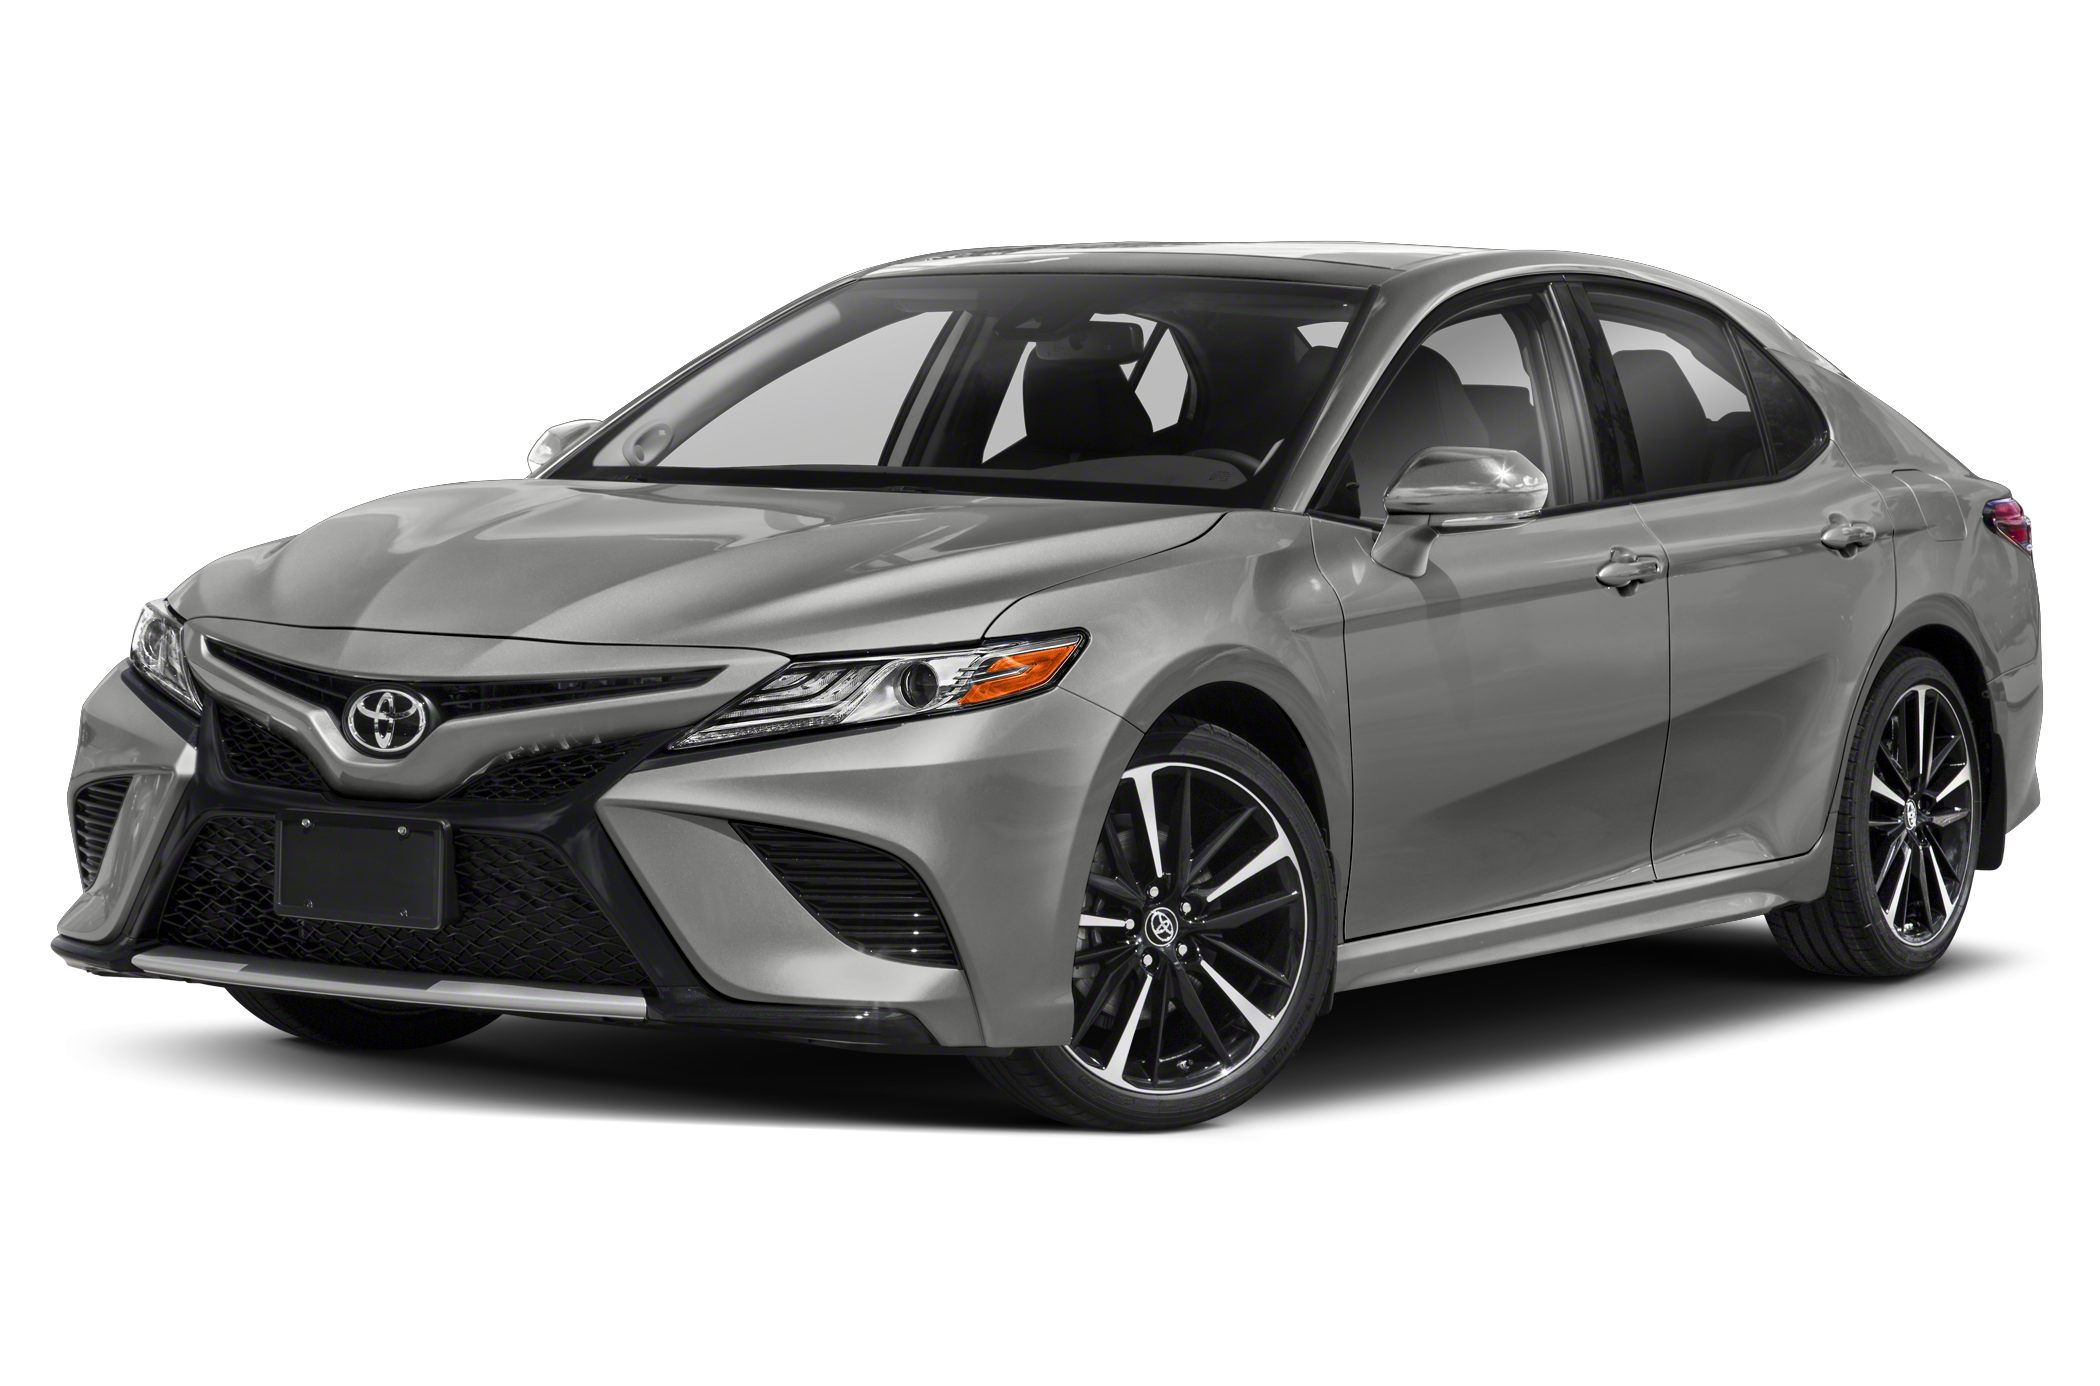 2019 Toyota Camry Xse 4dr Sedan Specs And Prices